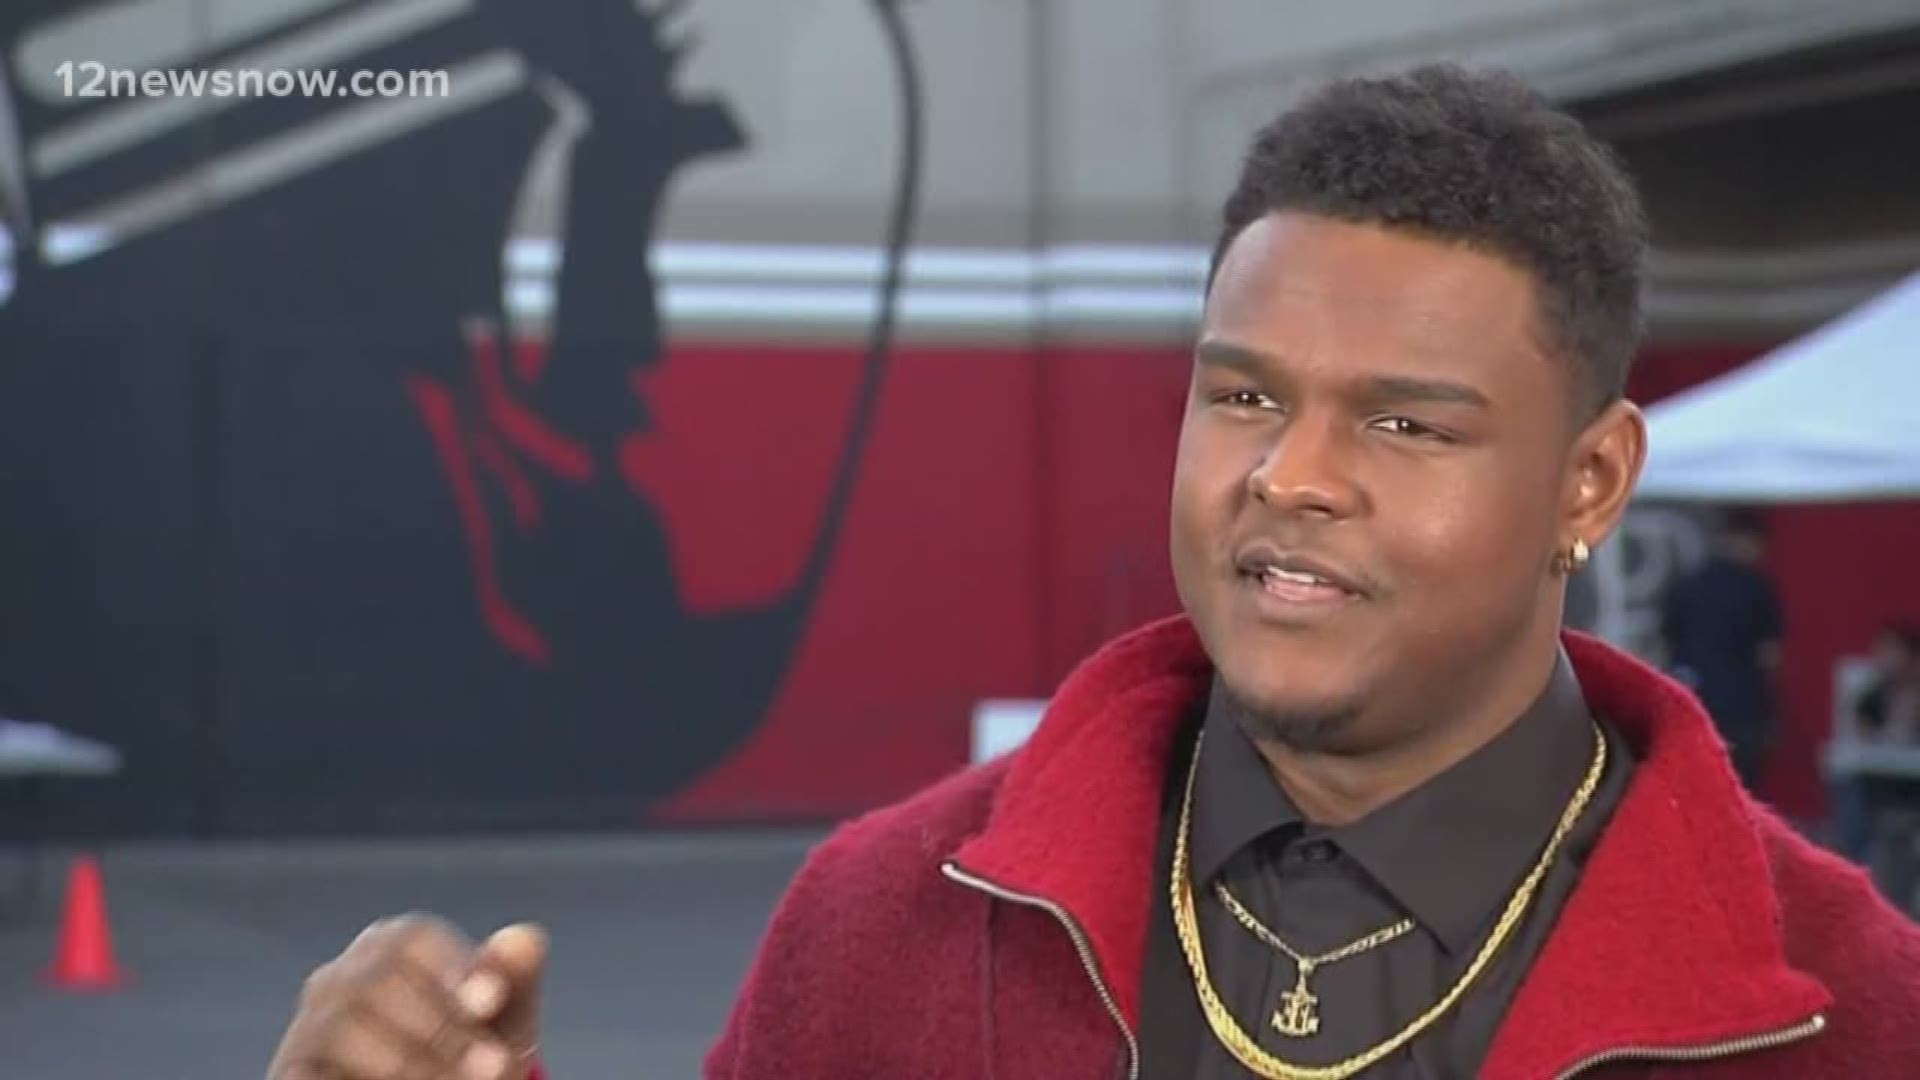 PORT ARTHUR NATIVE DE'ANDRE NICO IS COMPETING ON NBC'S "THE VOICE" TRYING TO MAKE THROUGH THE NEXT ROUND!